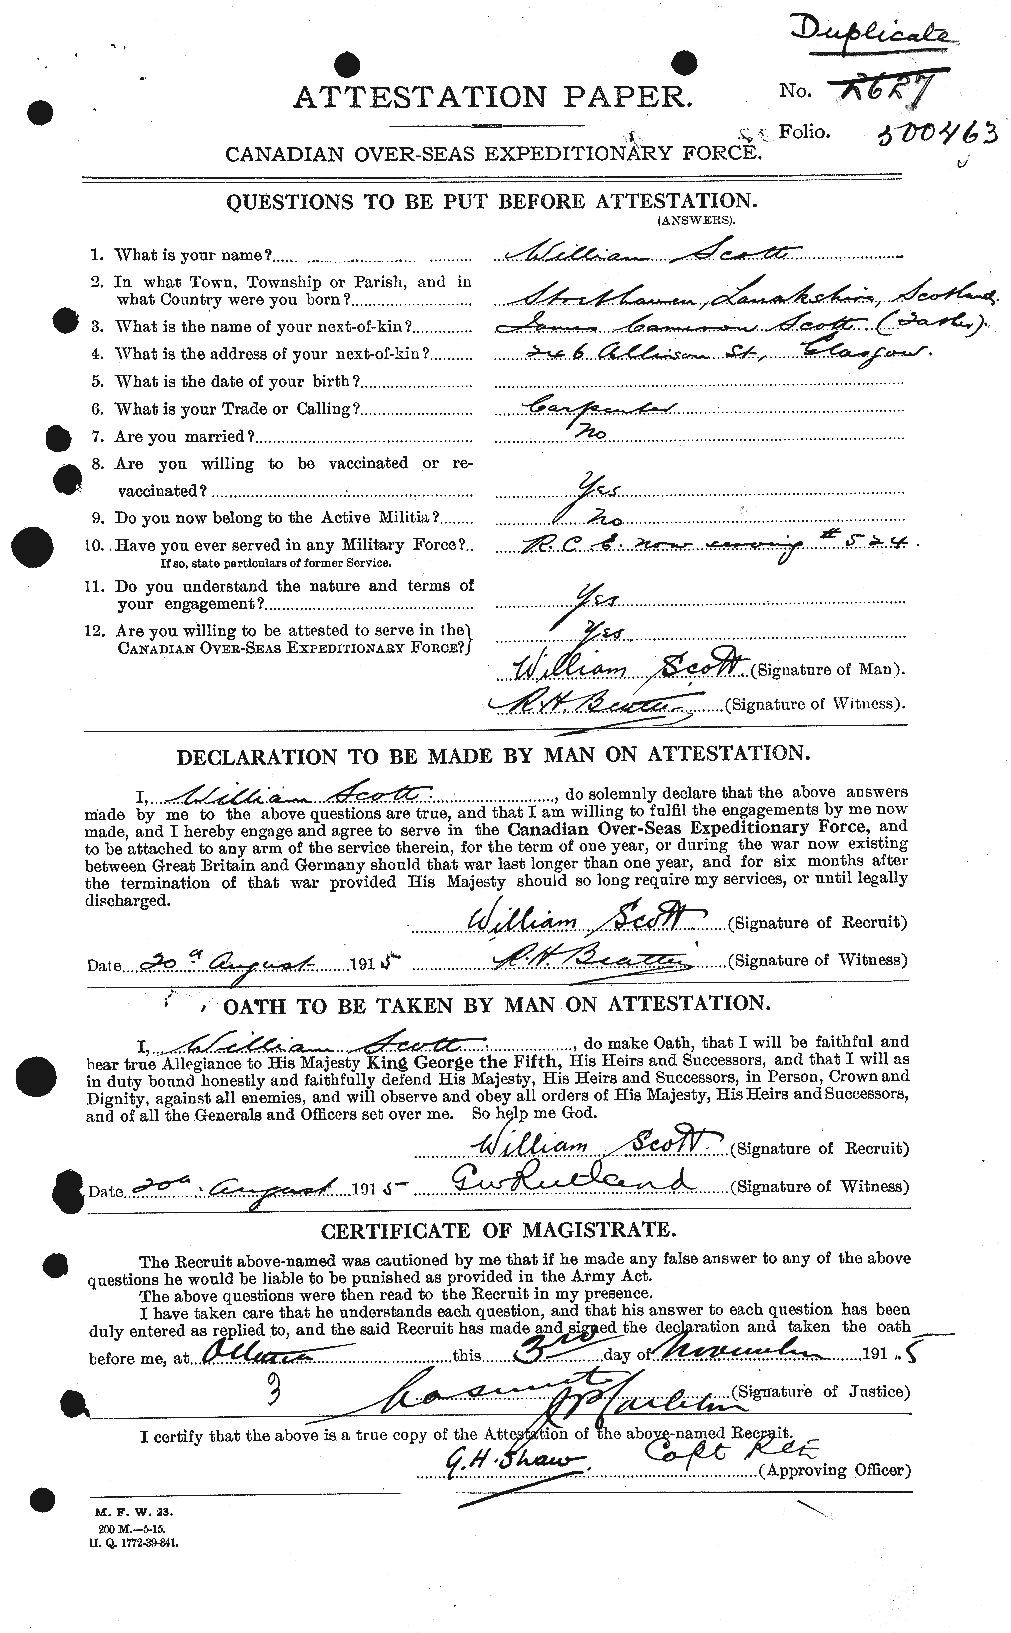 Personnel Records of the First World War - CEF 087371a